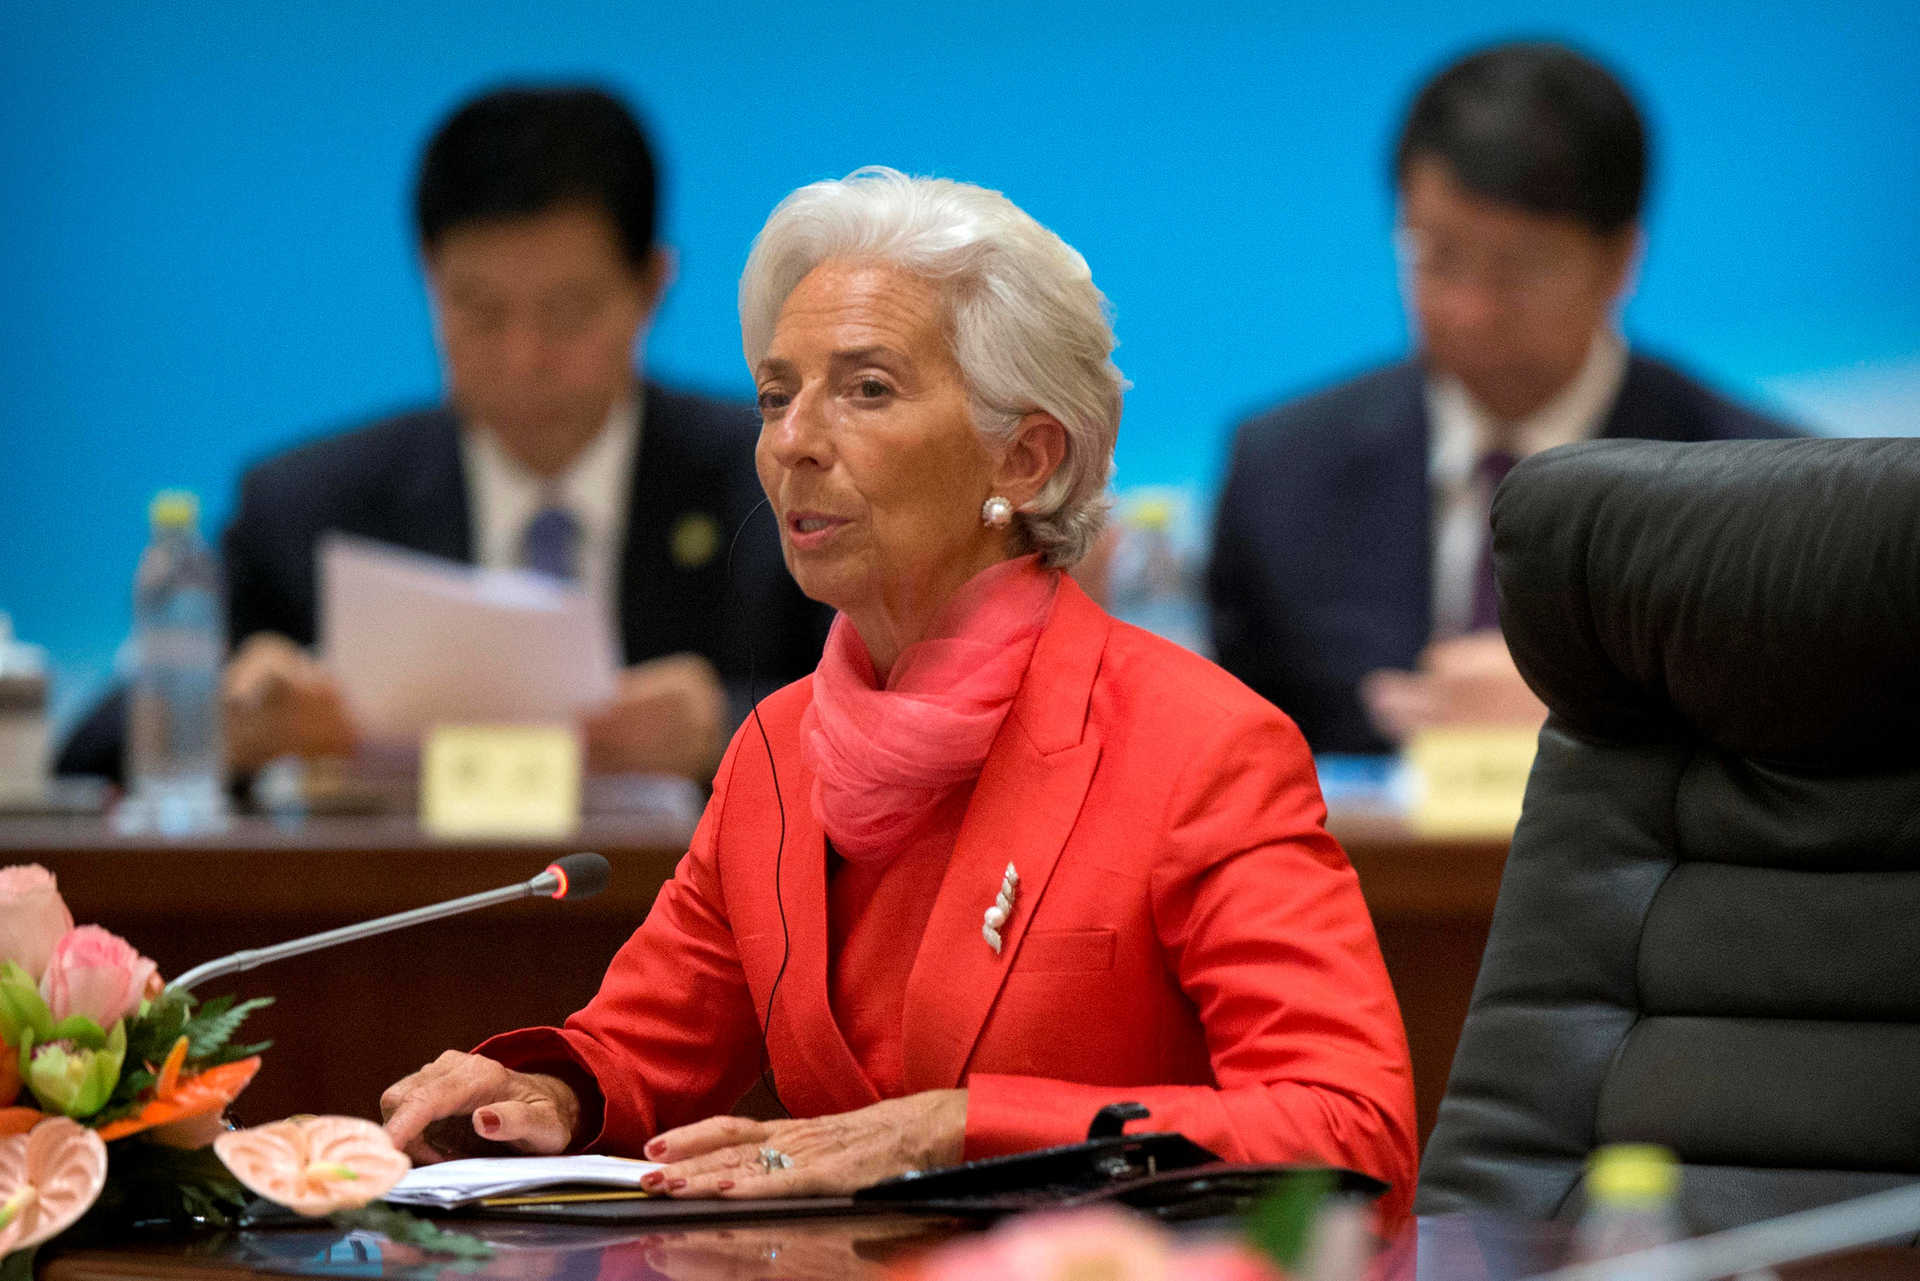 International Monetary Fund director Lagarde speaks at the 1+6 Roundtable on promoting growth in the Chinese and global economies at the Diaoyutai State Guesthouse in Beijing